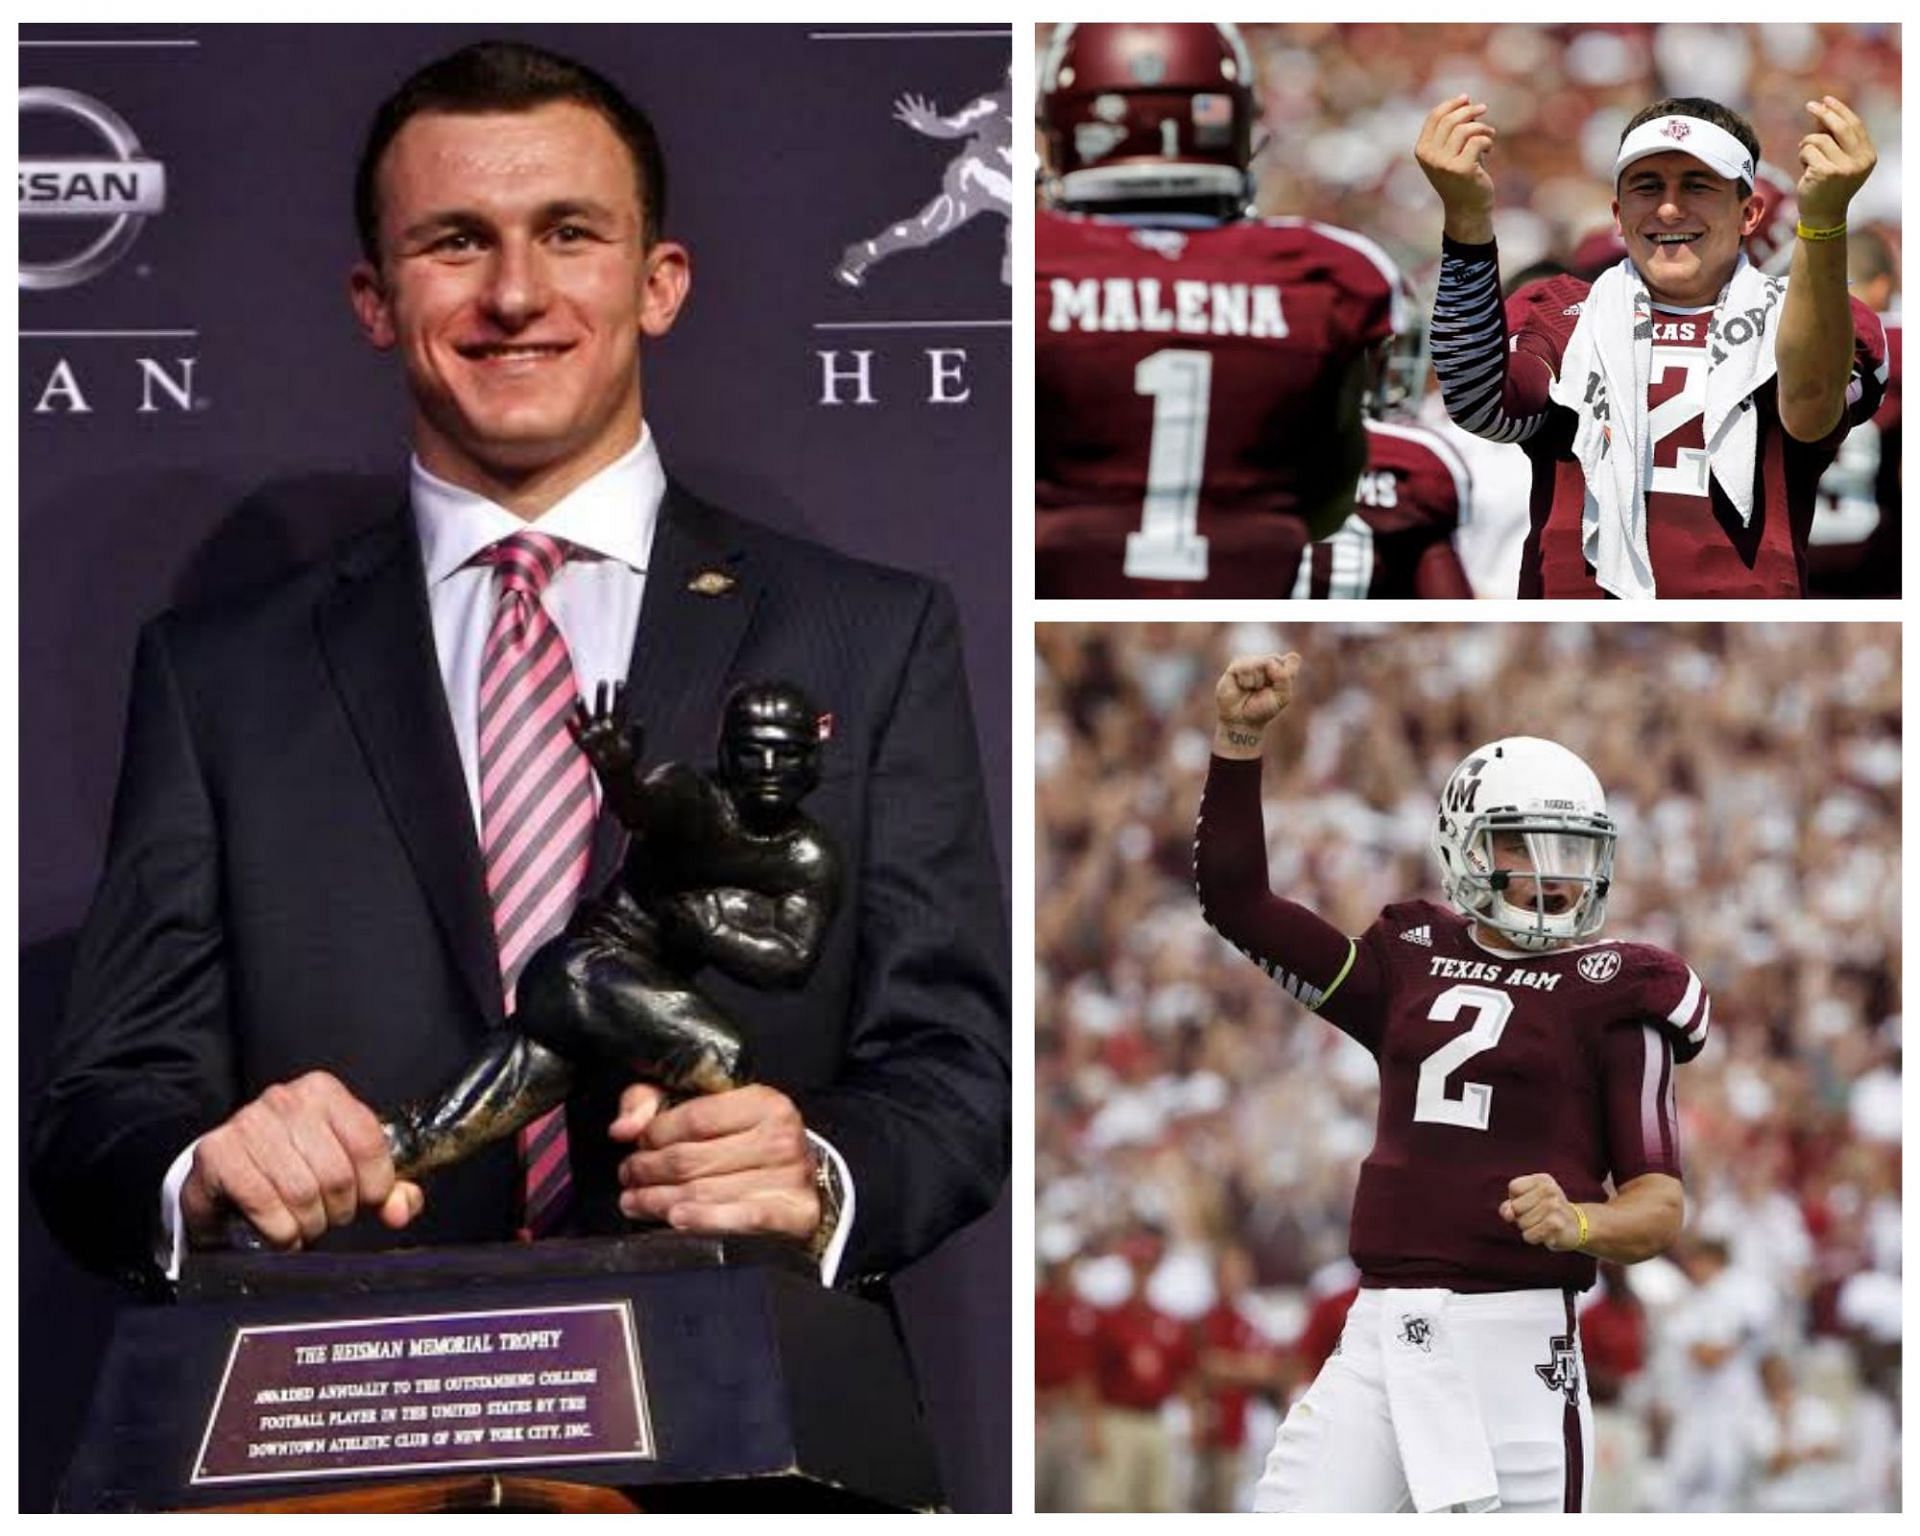 Johnny Manziel became the first freshman to the Heisman Trophy 